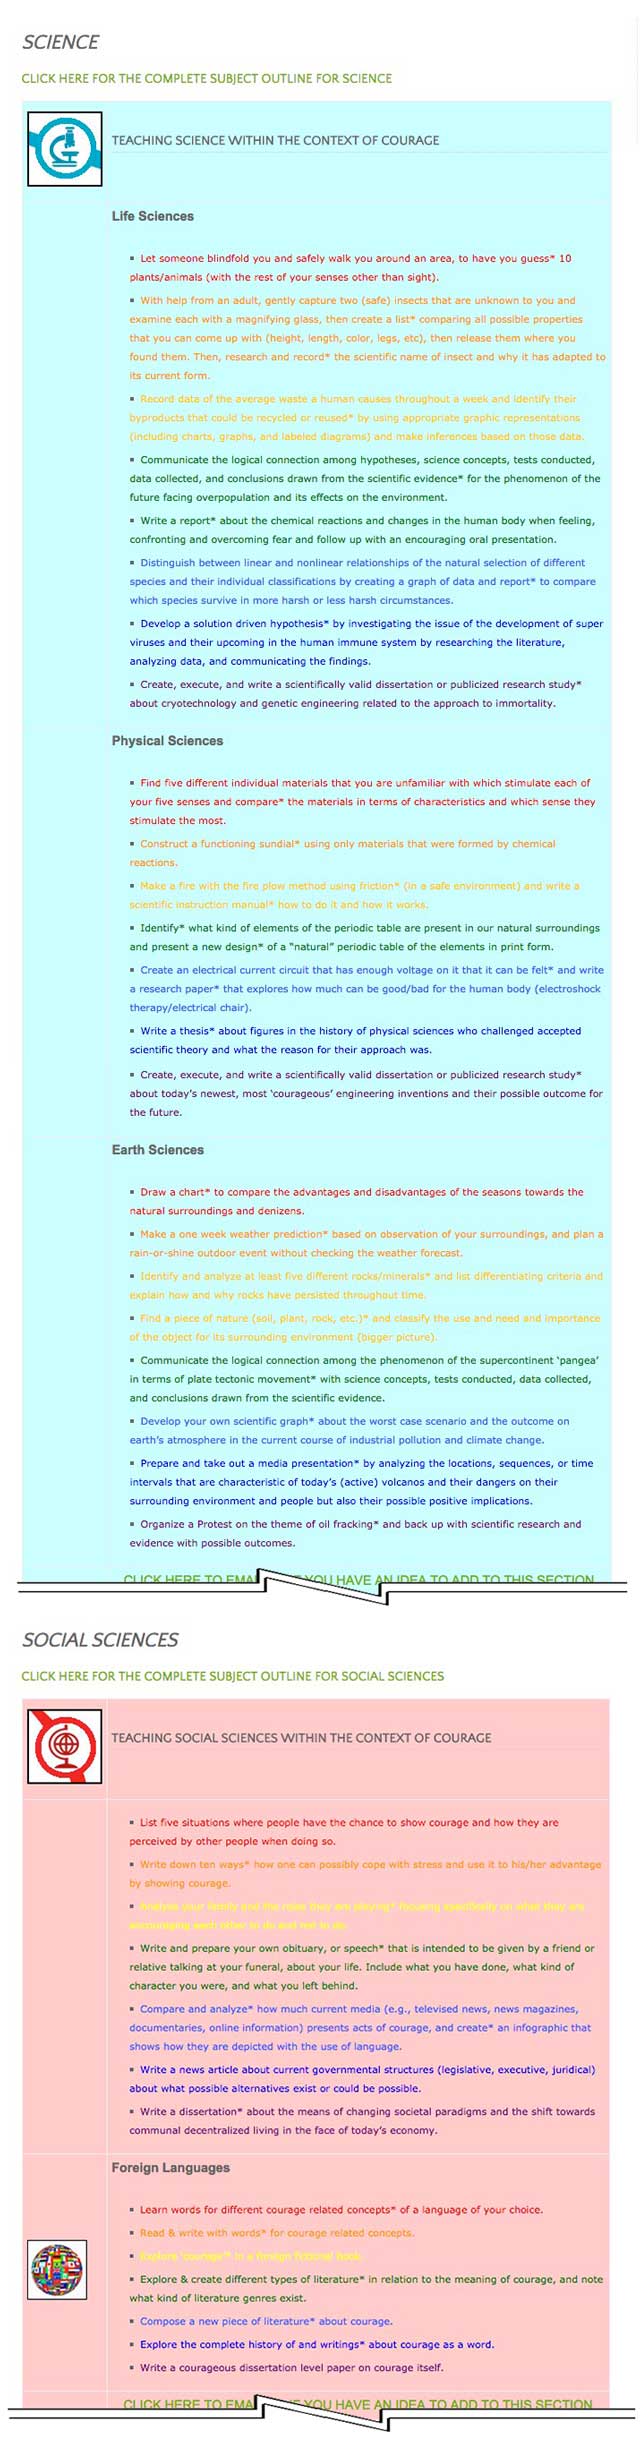 Caretakers of Our Shared Planet, This last week the core team transferred the third 25% of the written content for the Courage Lesson Plan to the website, as you see here. This lesson plan purposed to teach all subjects, to all learning levels, in any learning environment, using the central theme of "Courage" is now 75% completed on our website.